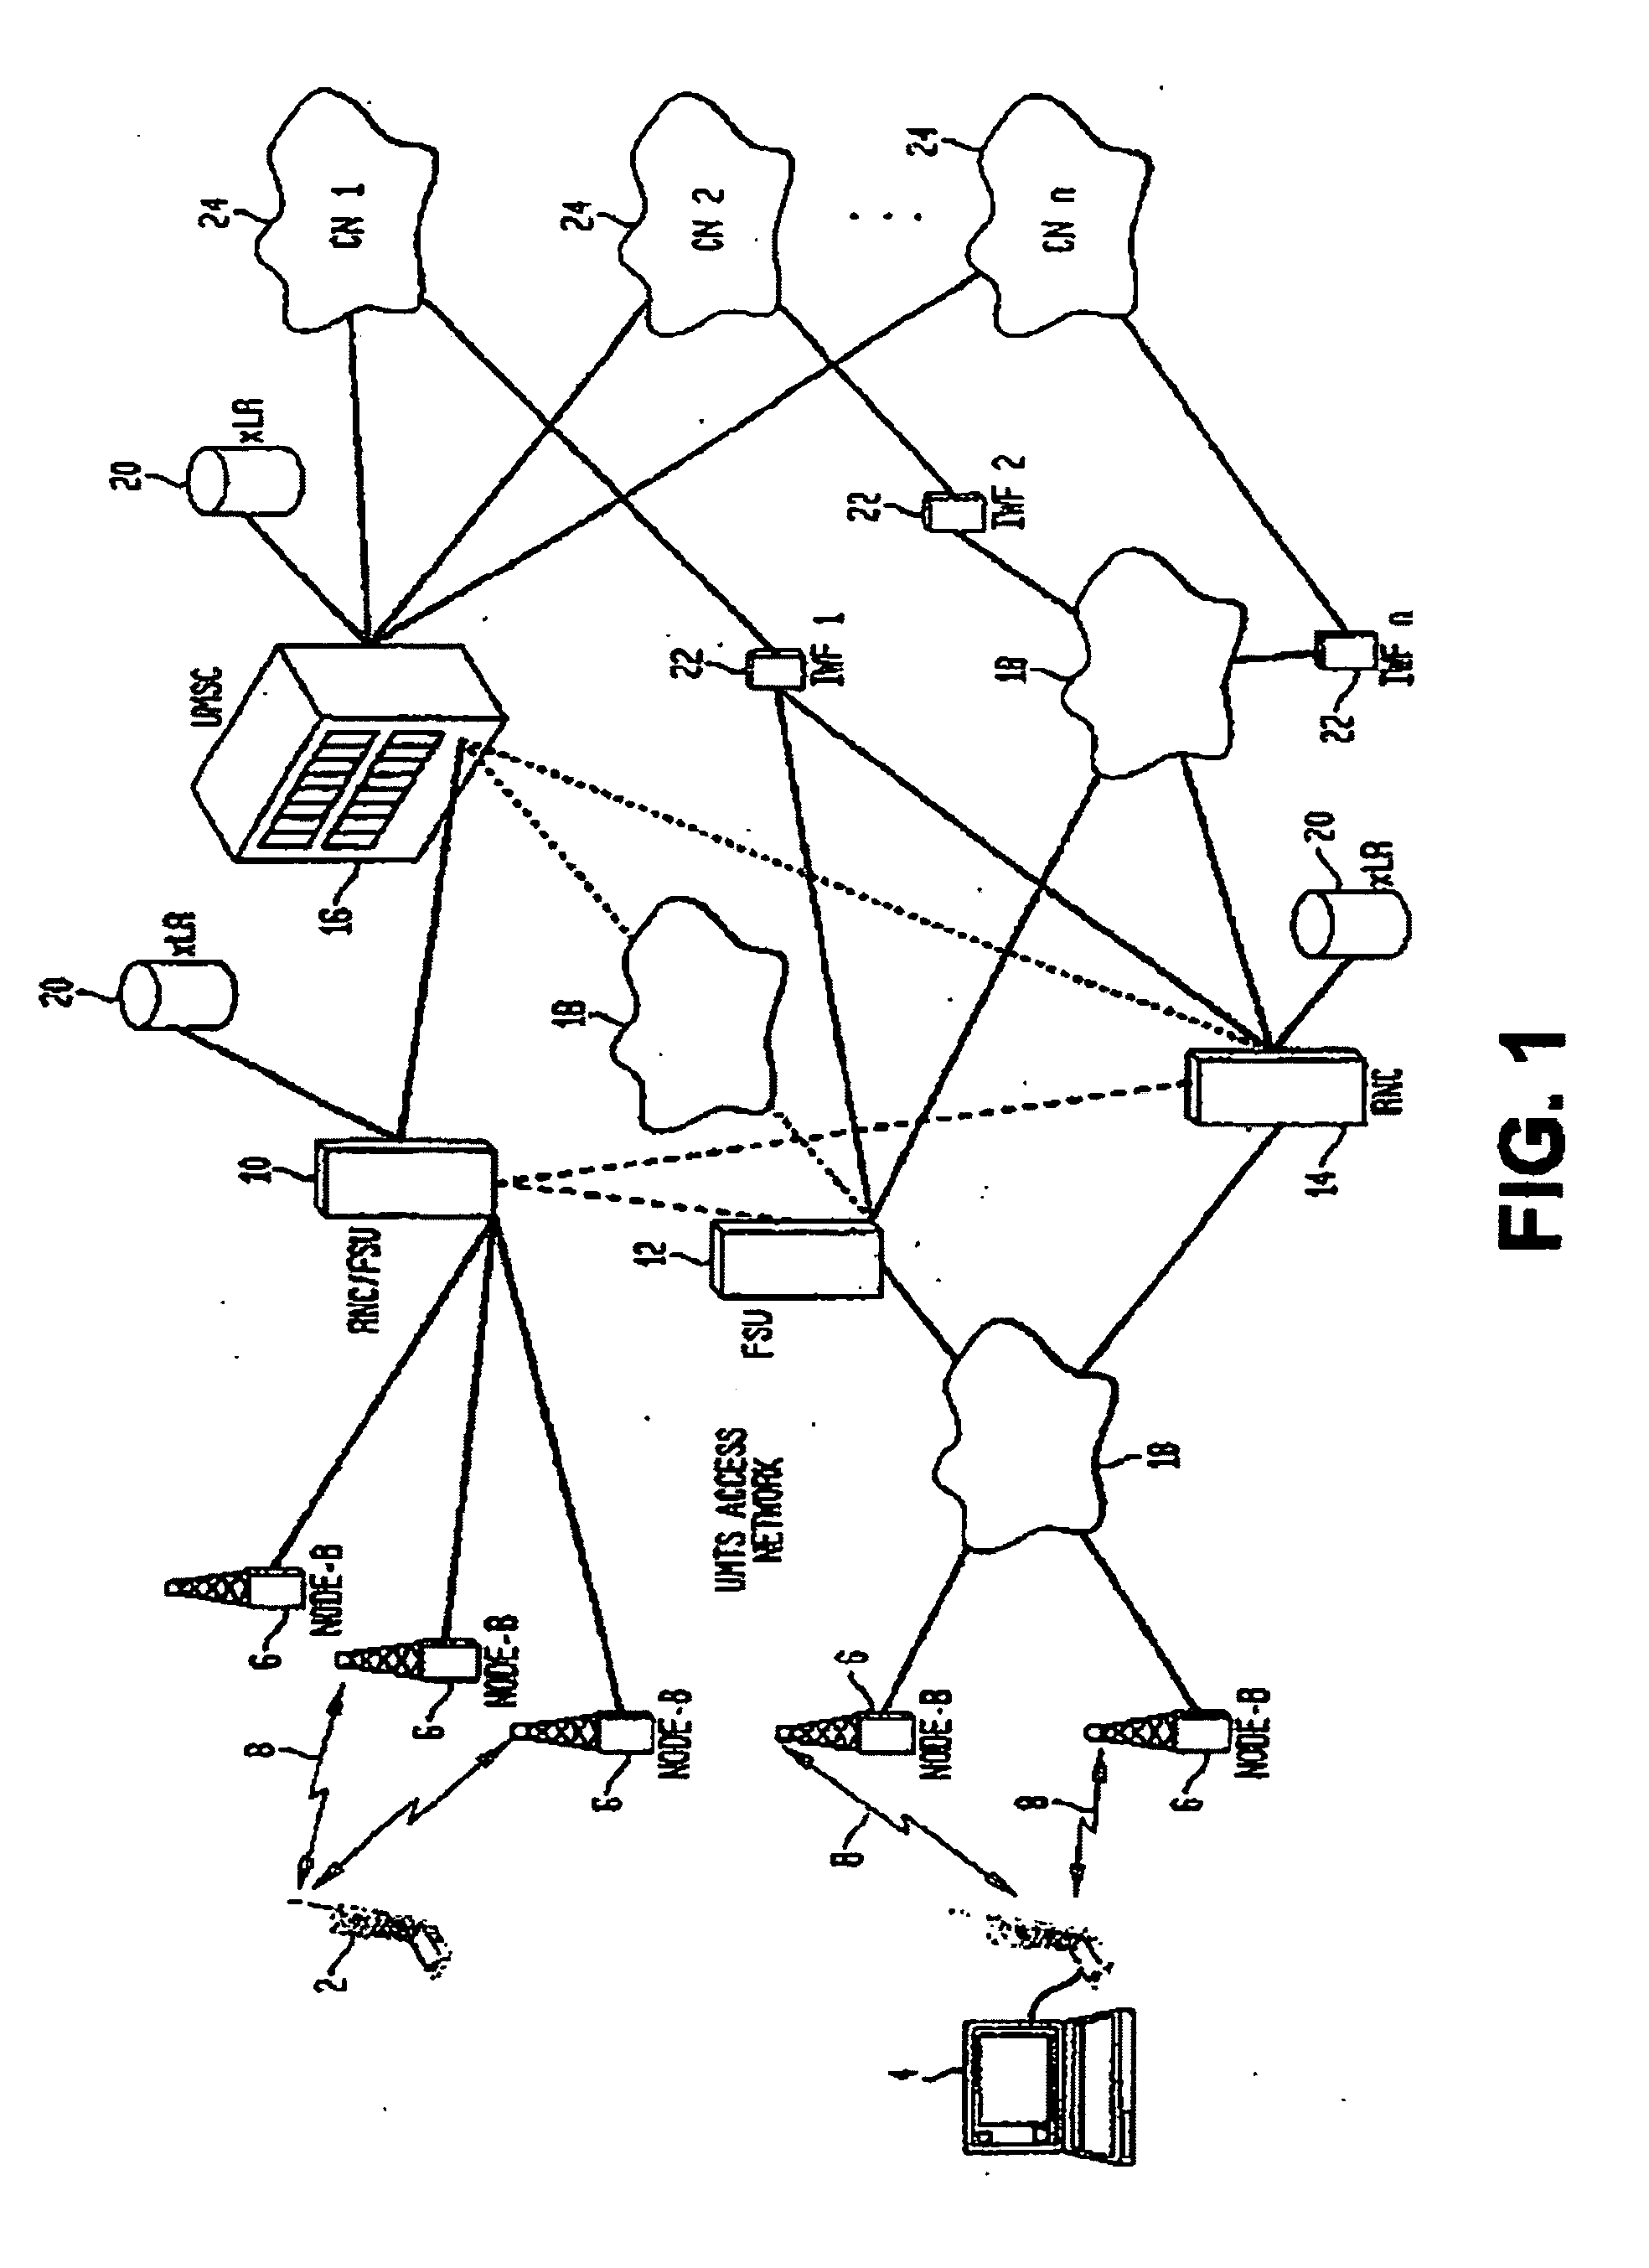 Method and system for rate-controlled mode wireless communications